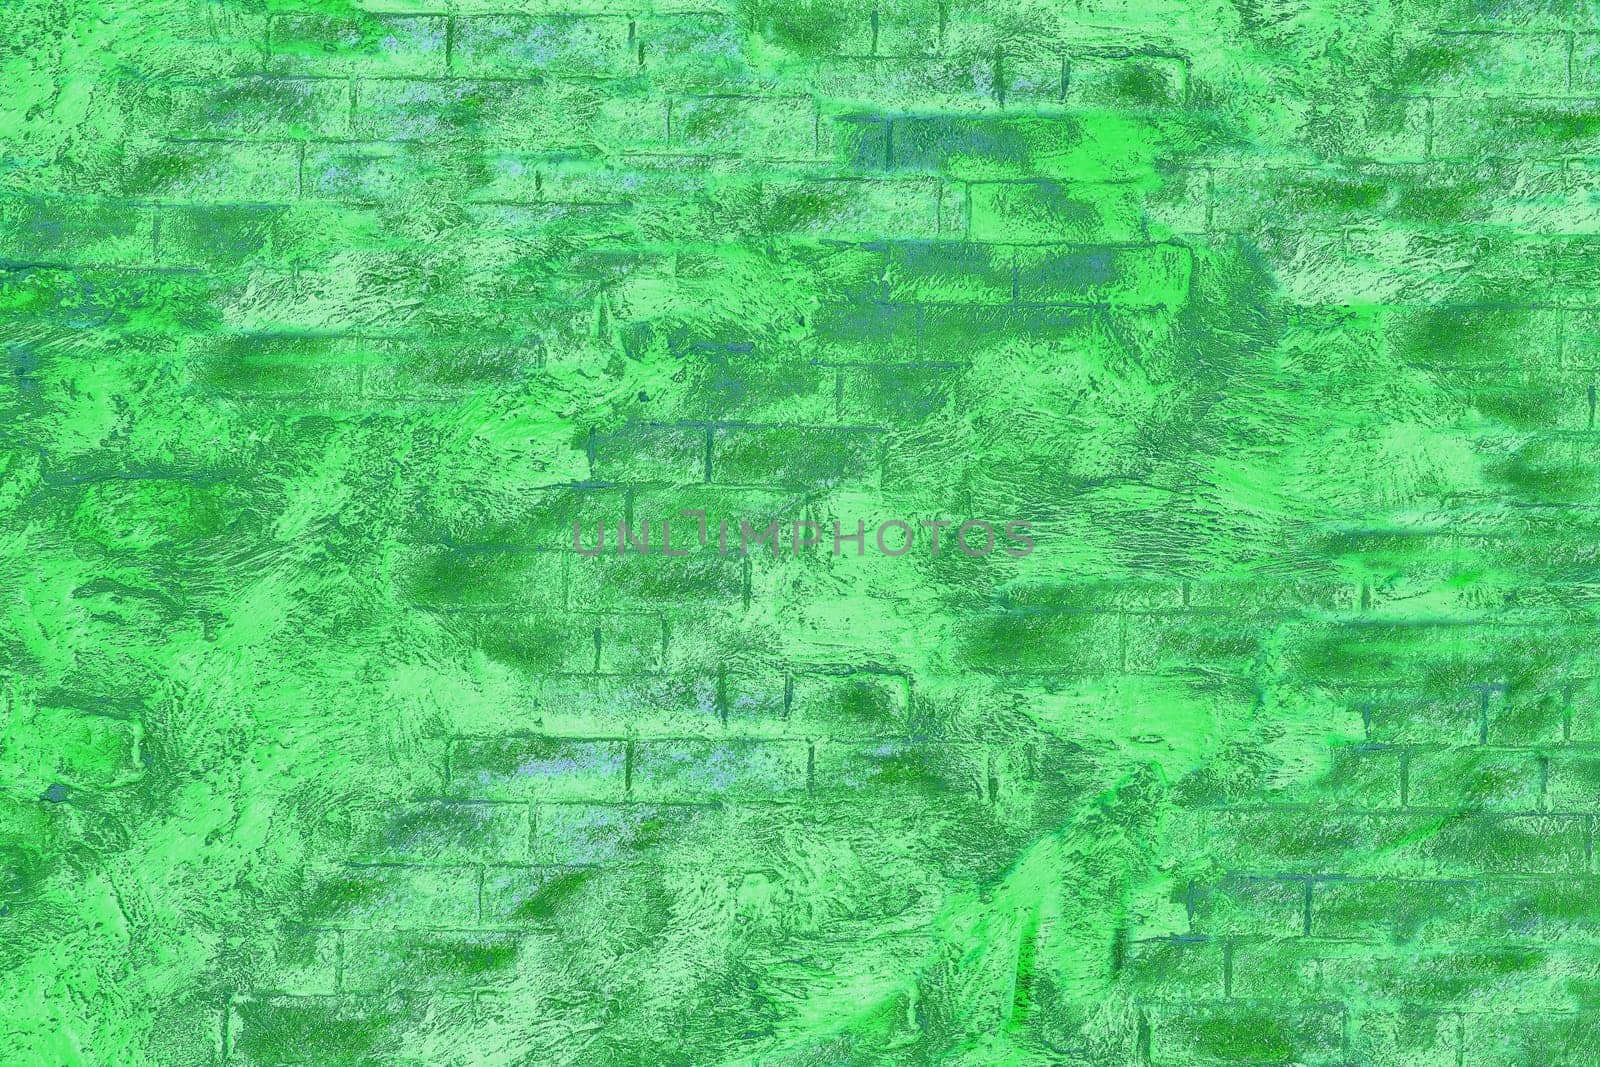 Green emerald brick wall with waves spots for text and decor by jovani68